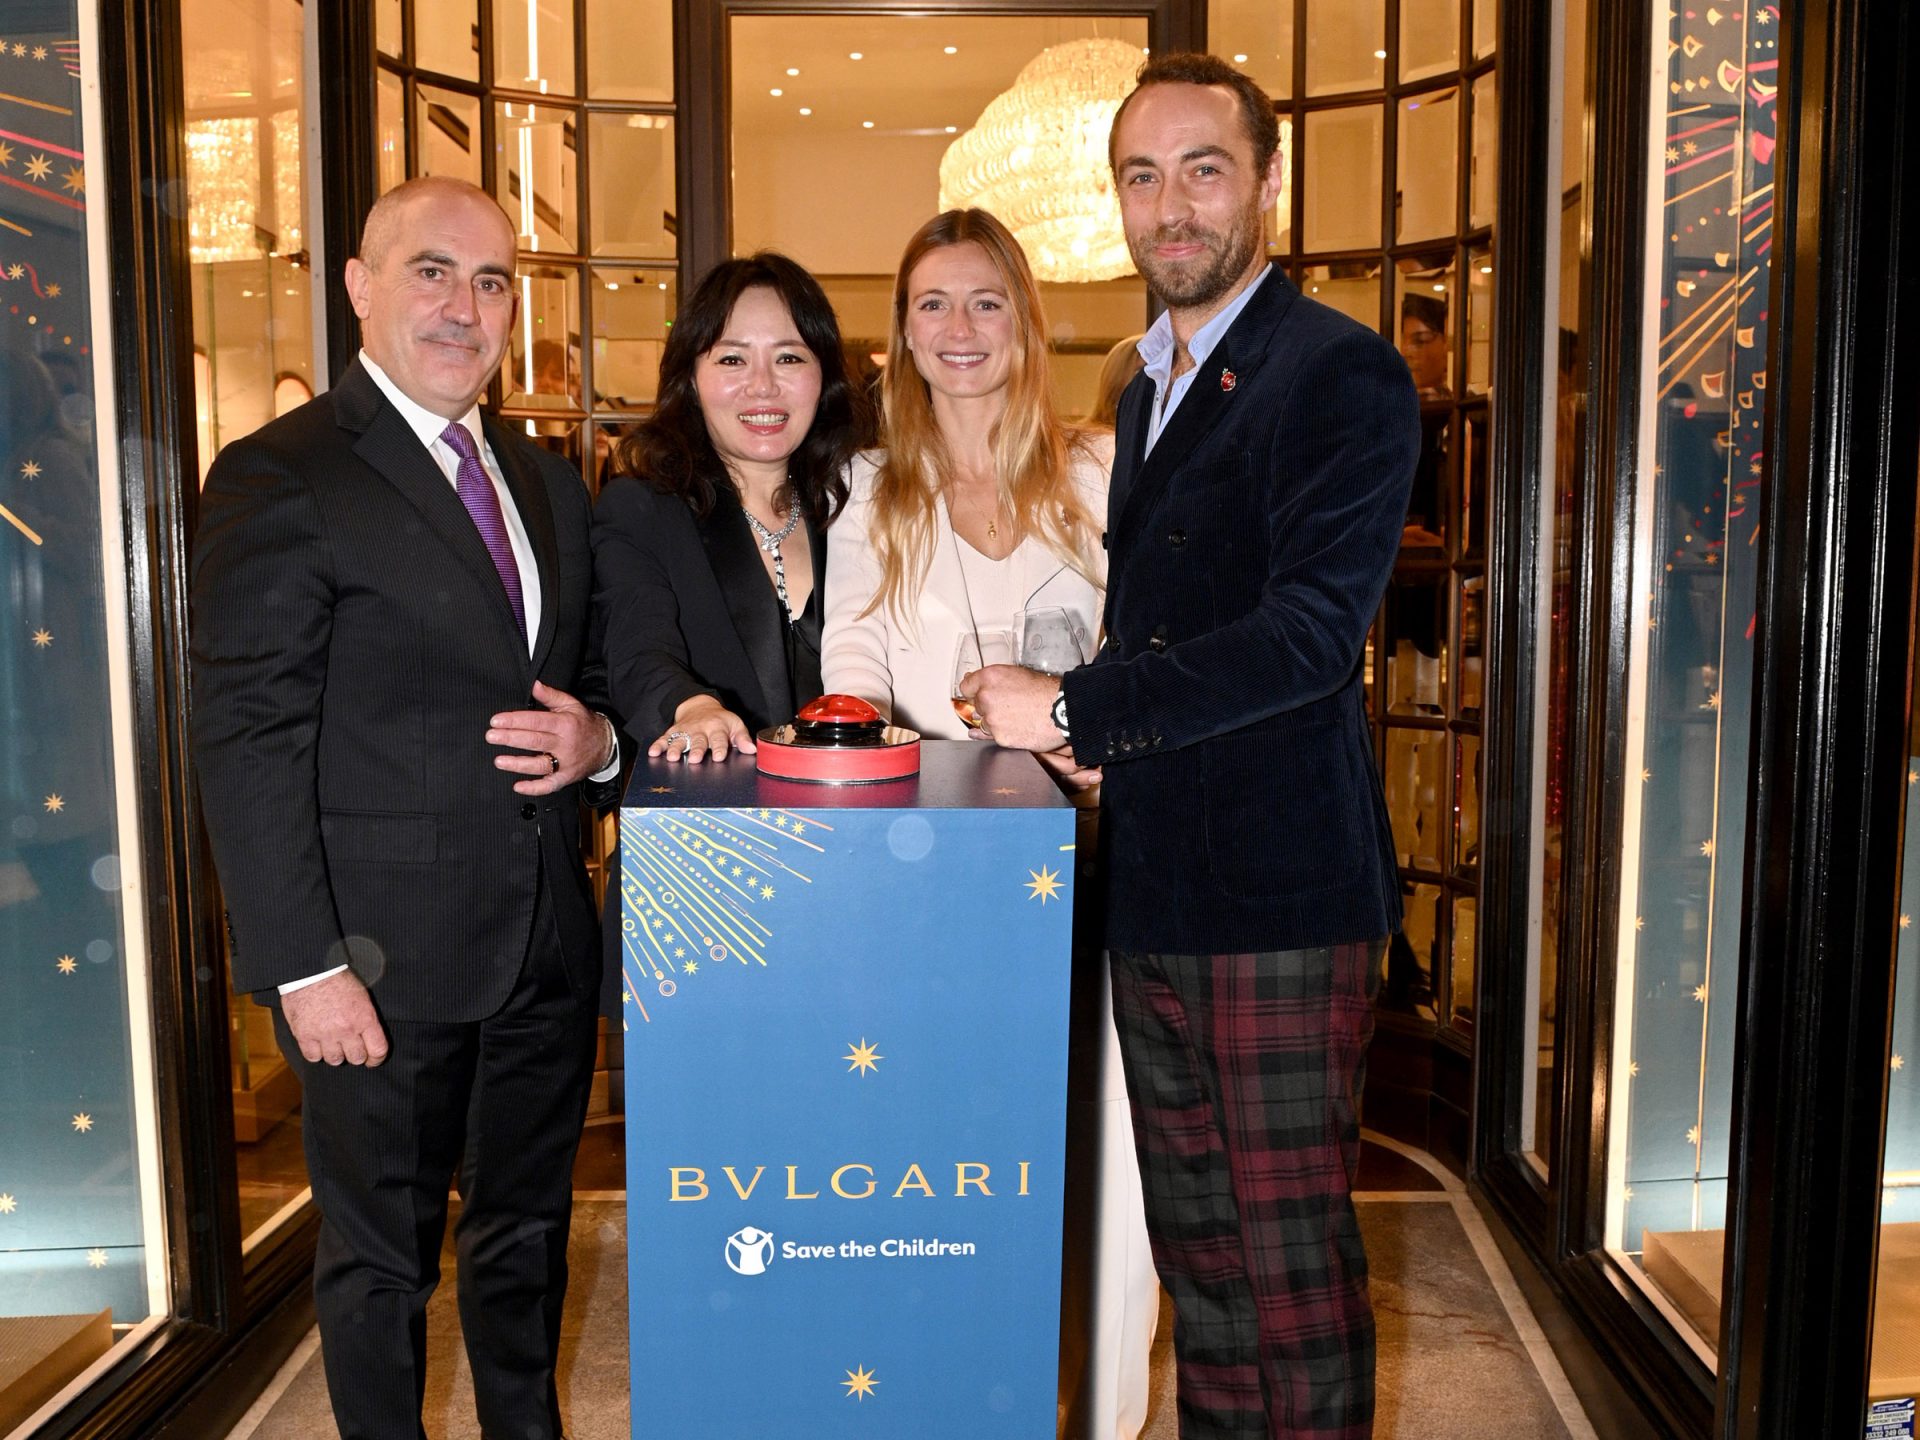 WATCH FACES: Bulgari Switches On Its Christmas Lights